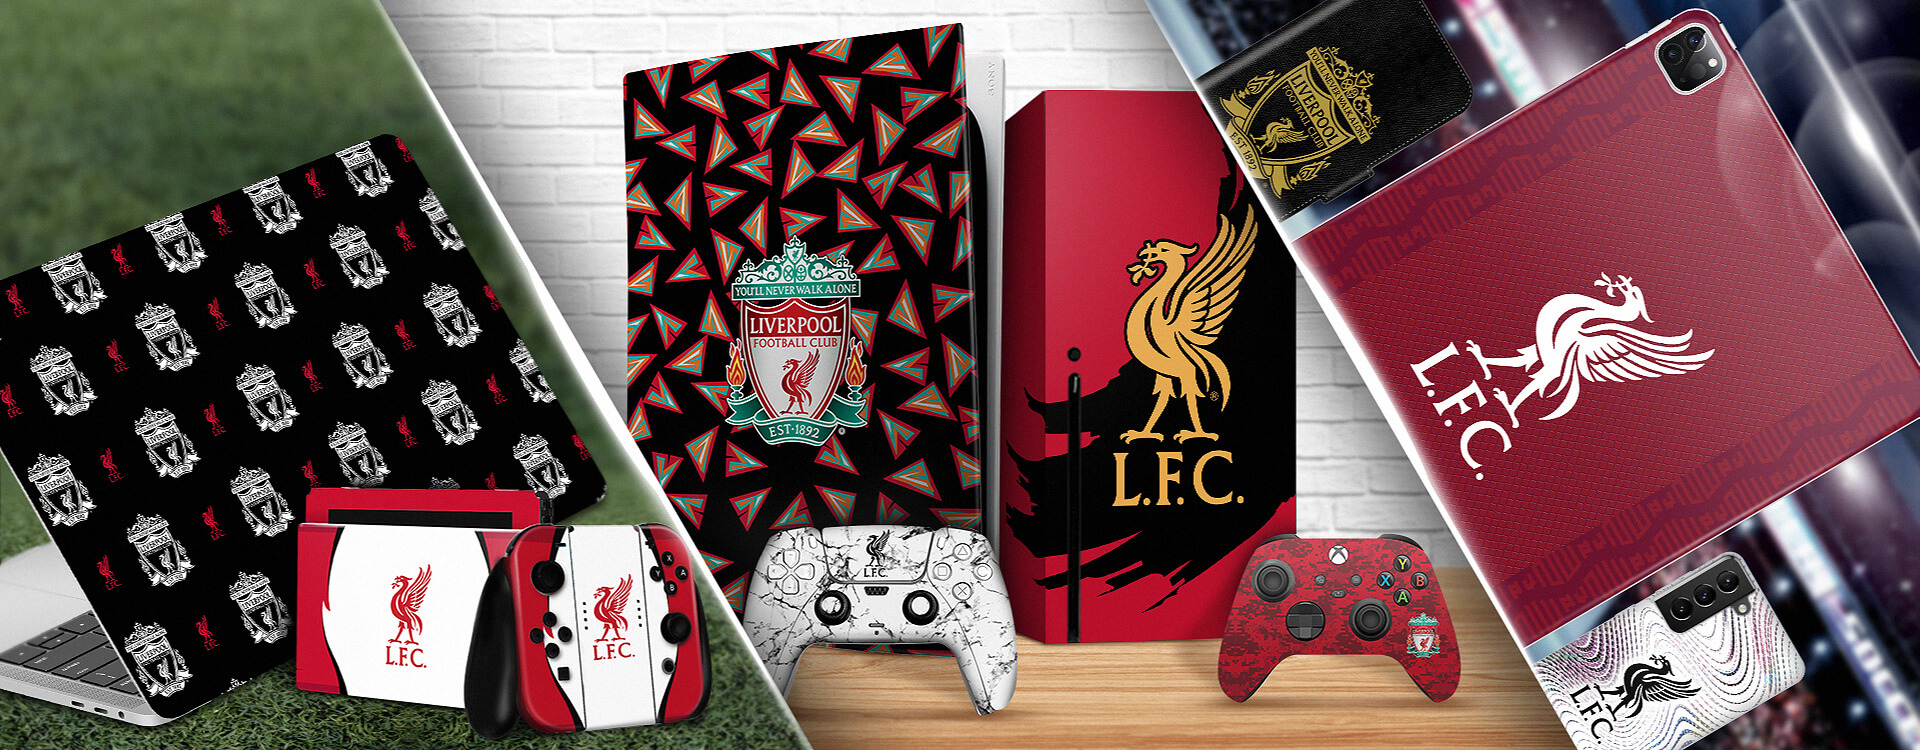 LFC Phone Cases, Laptop and Console Skins, and Accessories